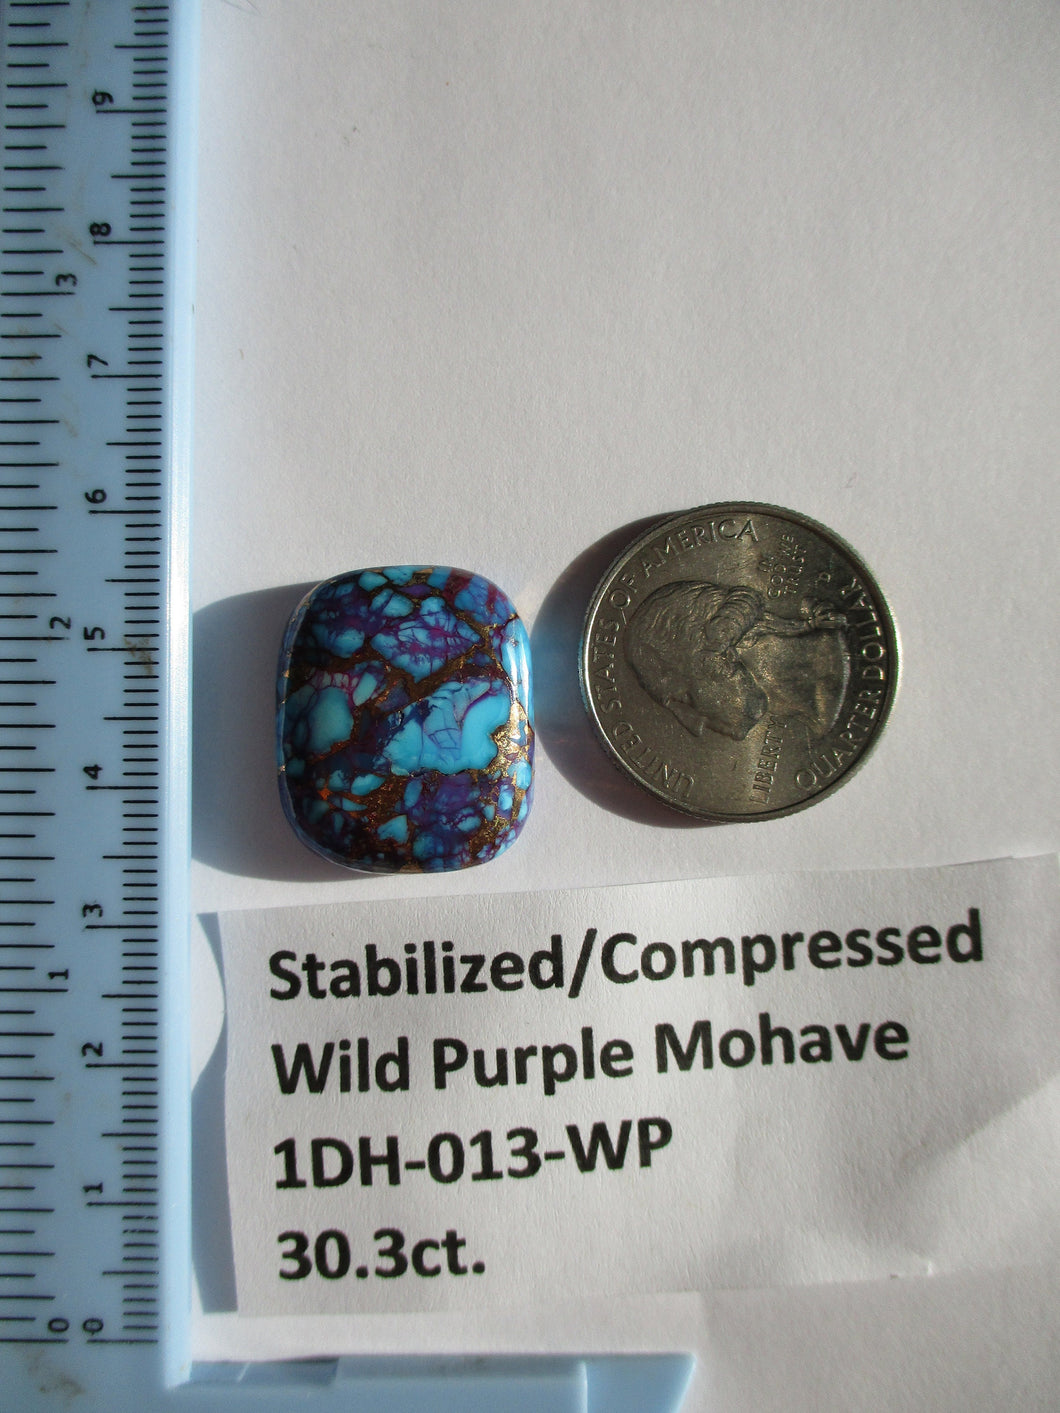 30.3 ct. (23x19x7 mm) Pressed/Dyed/Stabilized Kingman Wild Purple Mohave Turquoise Gemstone 1DH 013